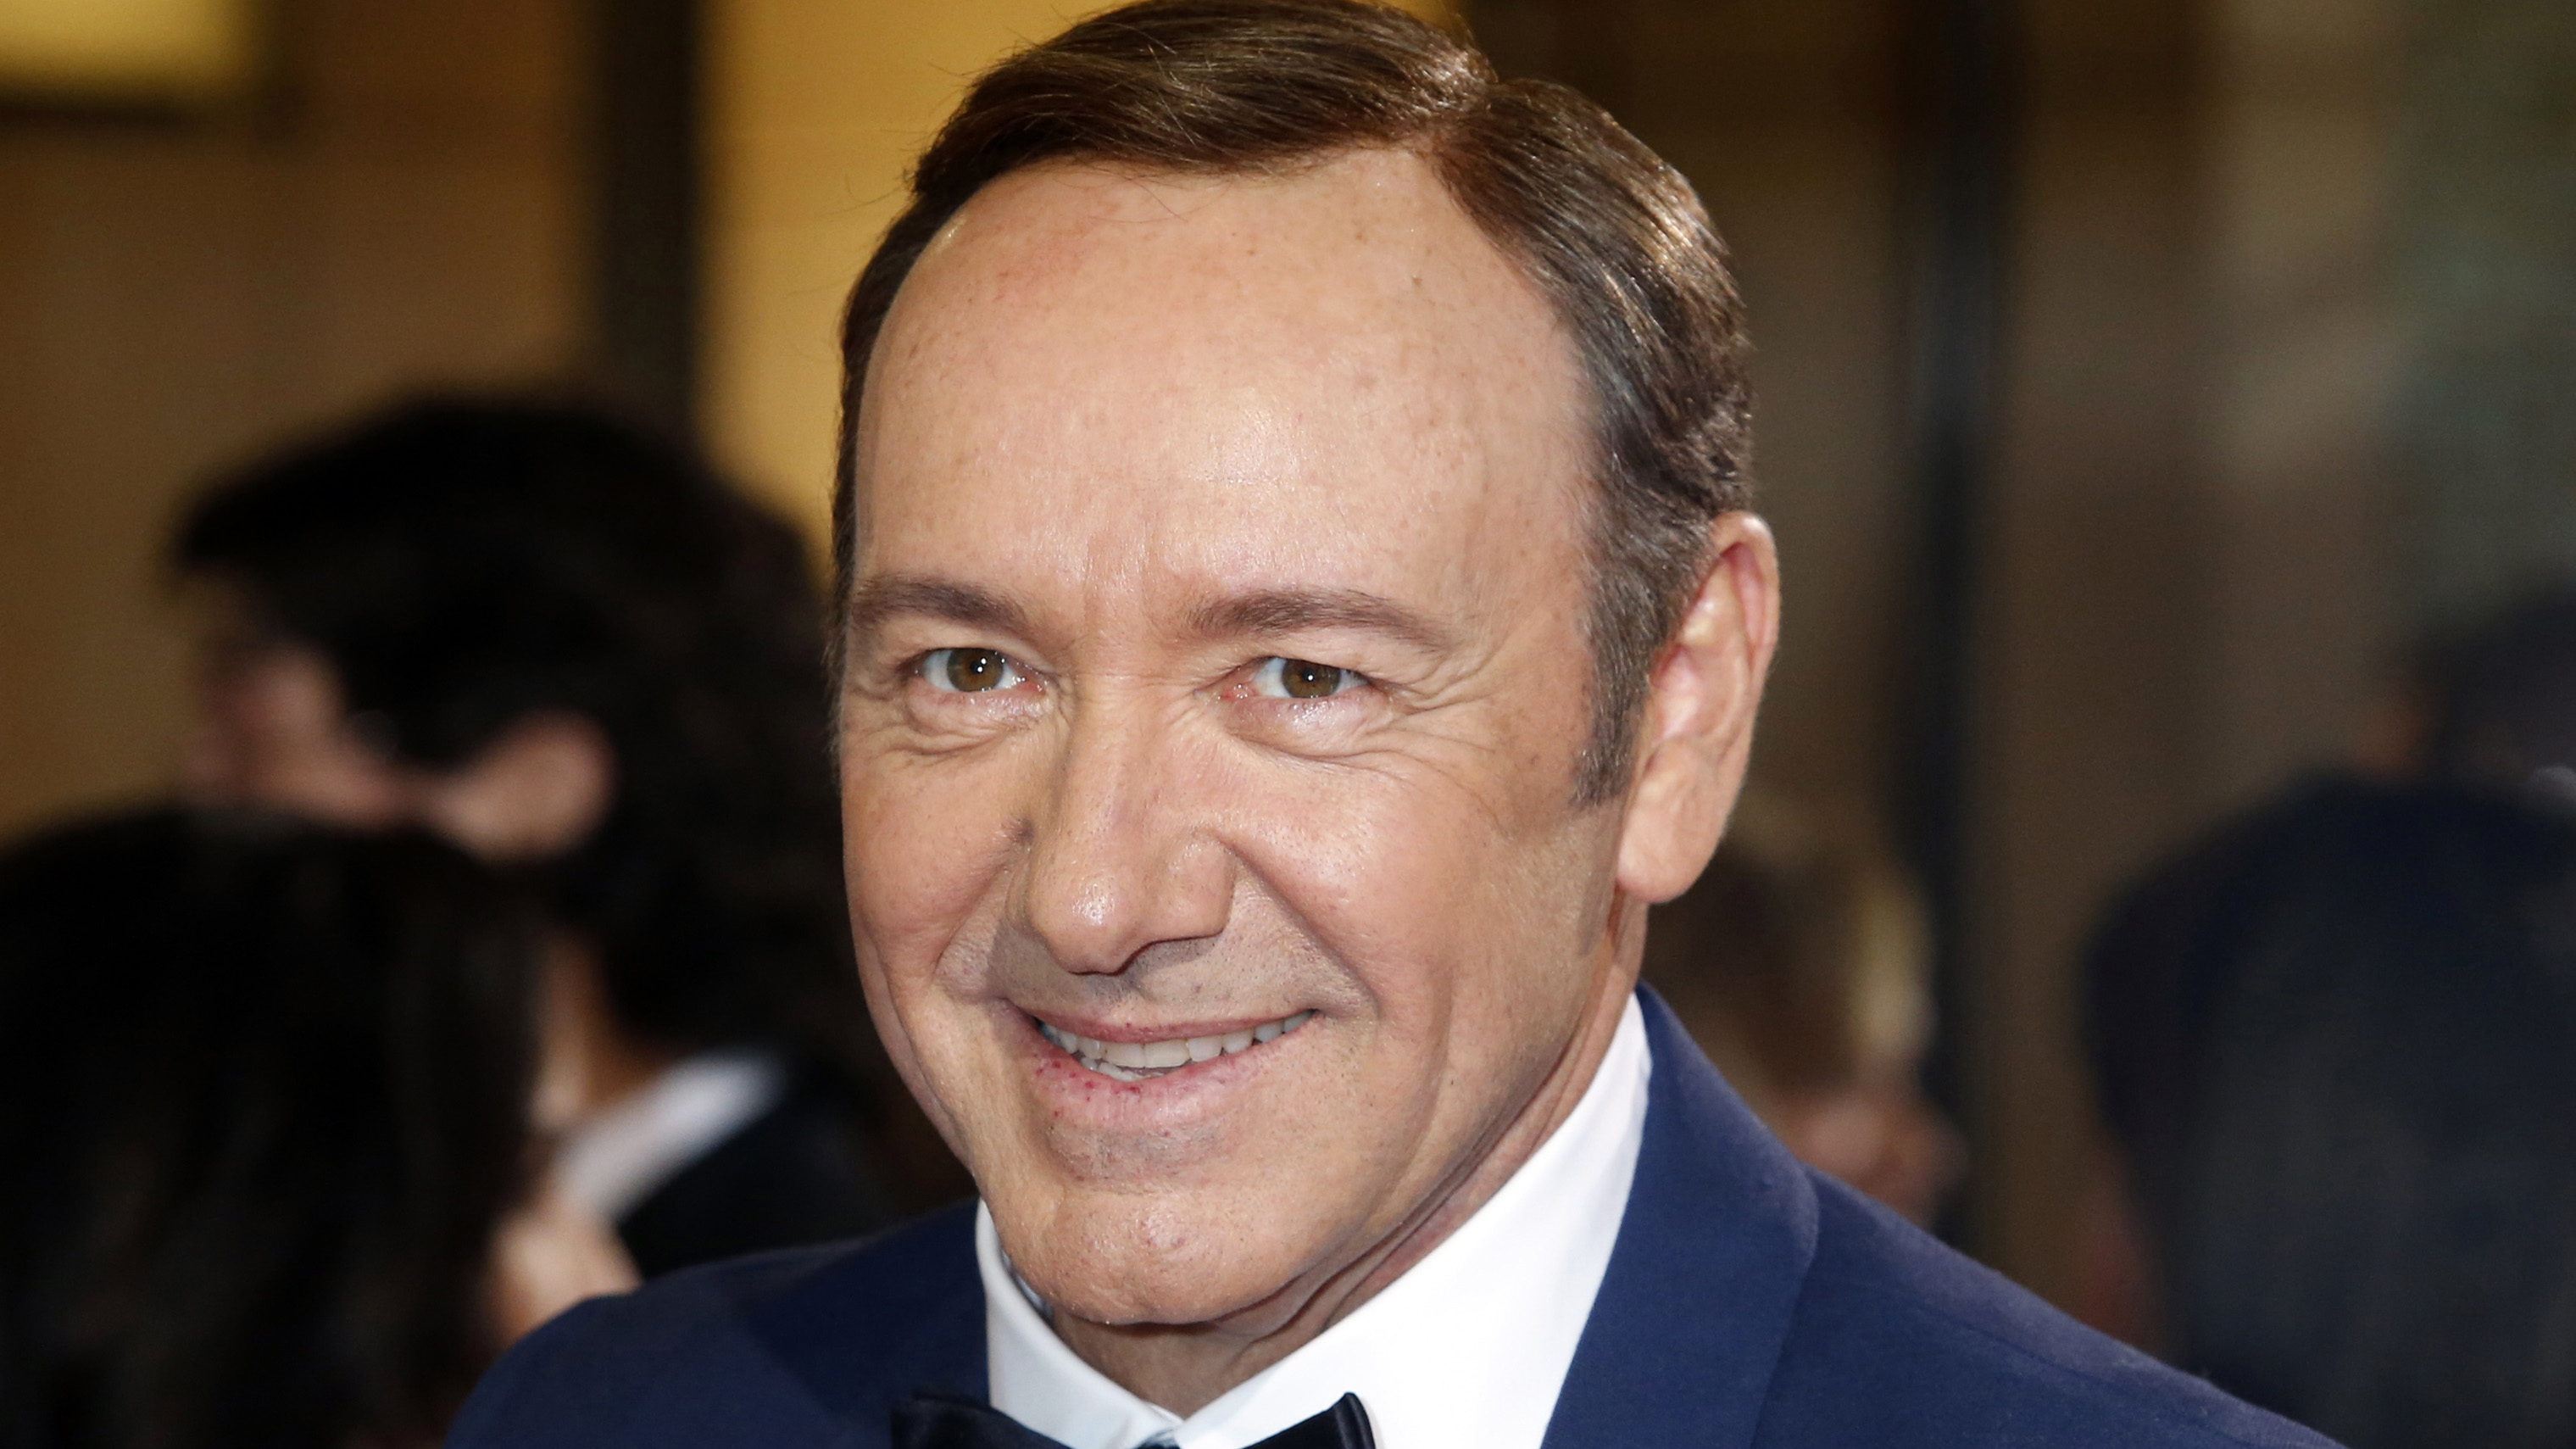 Actor Kevin Spacey and WISeKey CEO Carlos Moreira on efforts to improve cyber security and protect information.